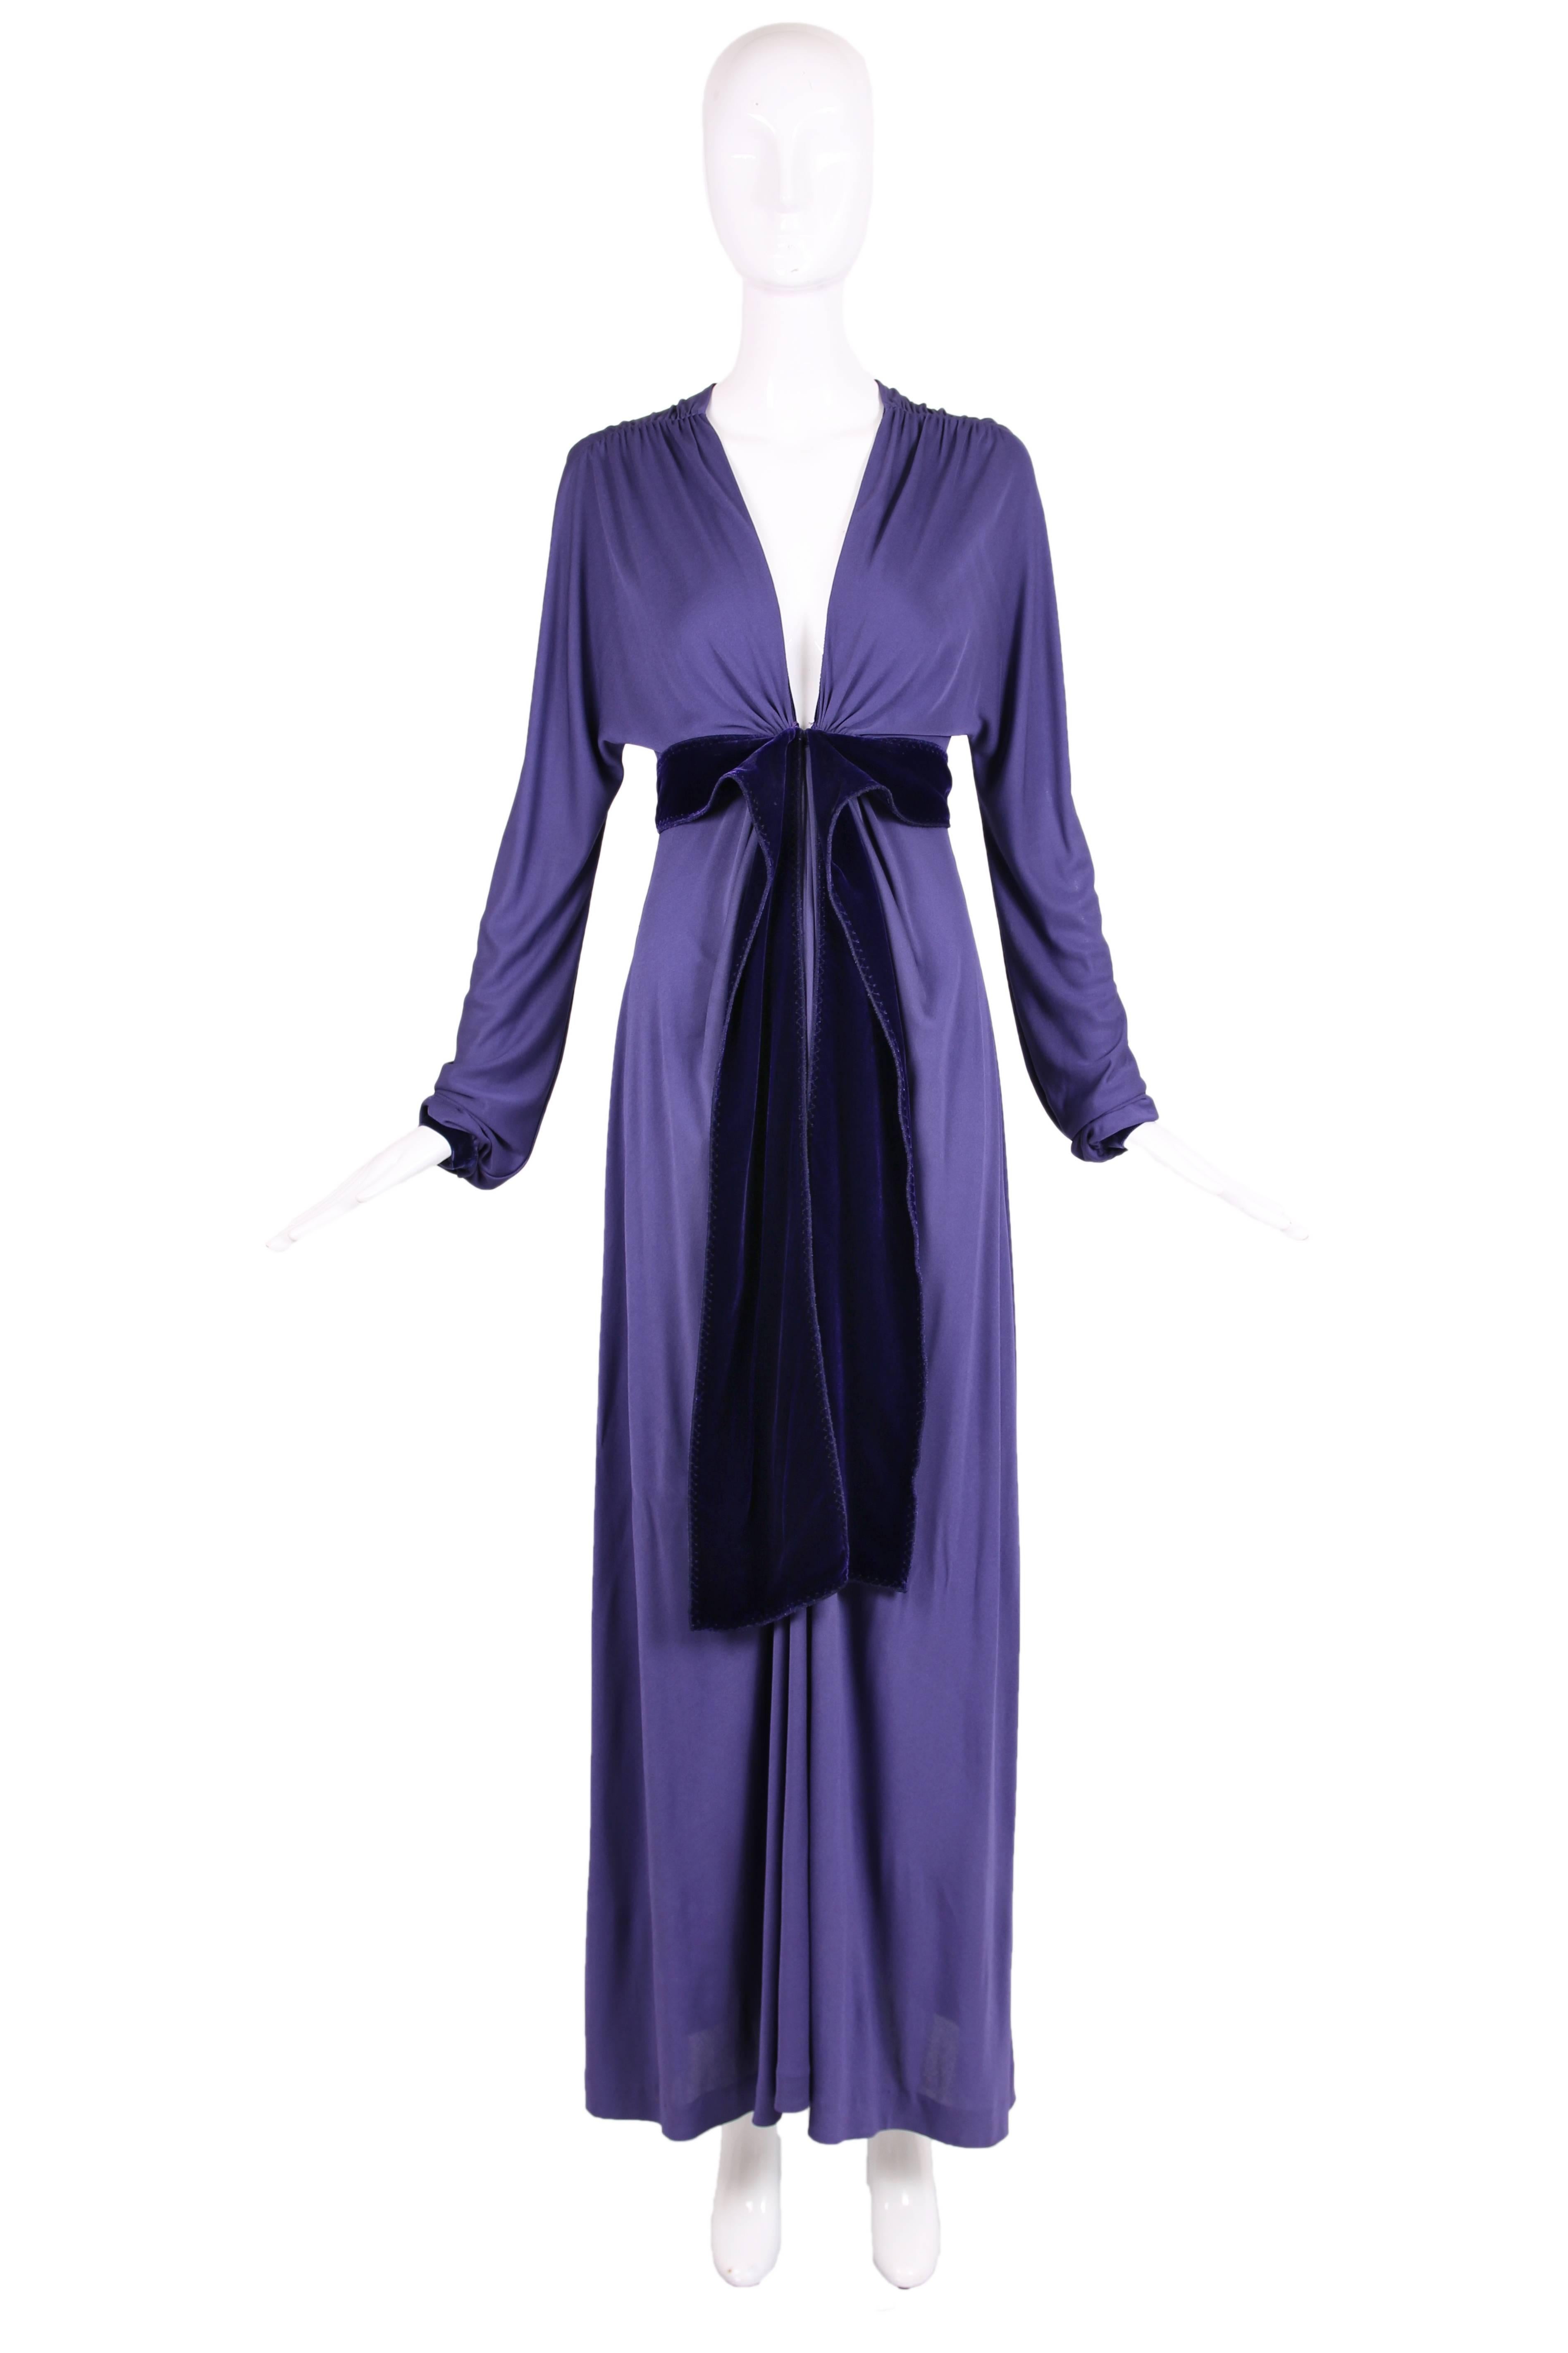 Yves Saint Laurent by Tom Ford purple maxi dress with plunging neckline, empire waist, and extra long sleeves. Ruching at the shoulders and waist with a thick deep purple velvet band to be worn open or tied at front waist. Deep purple velvet trim